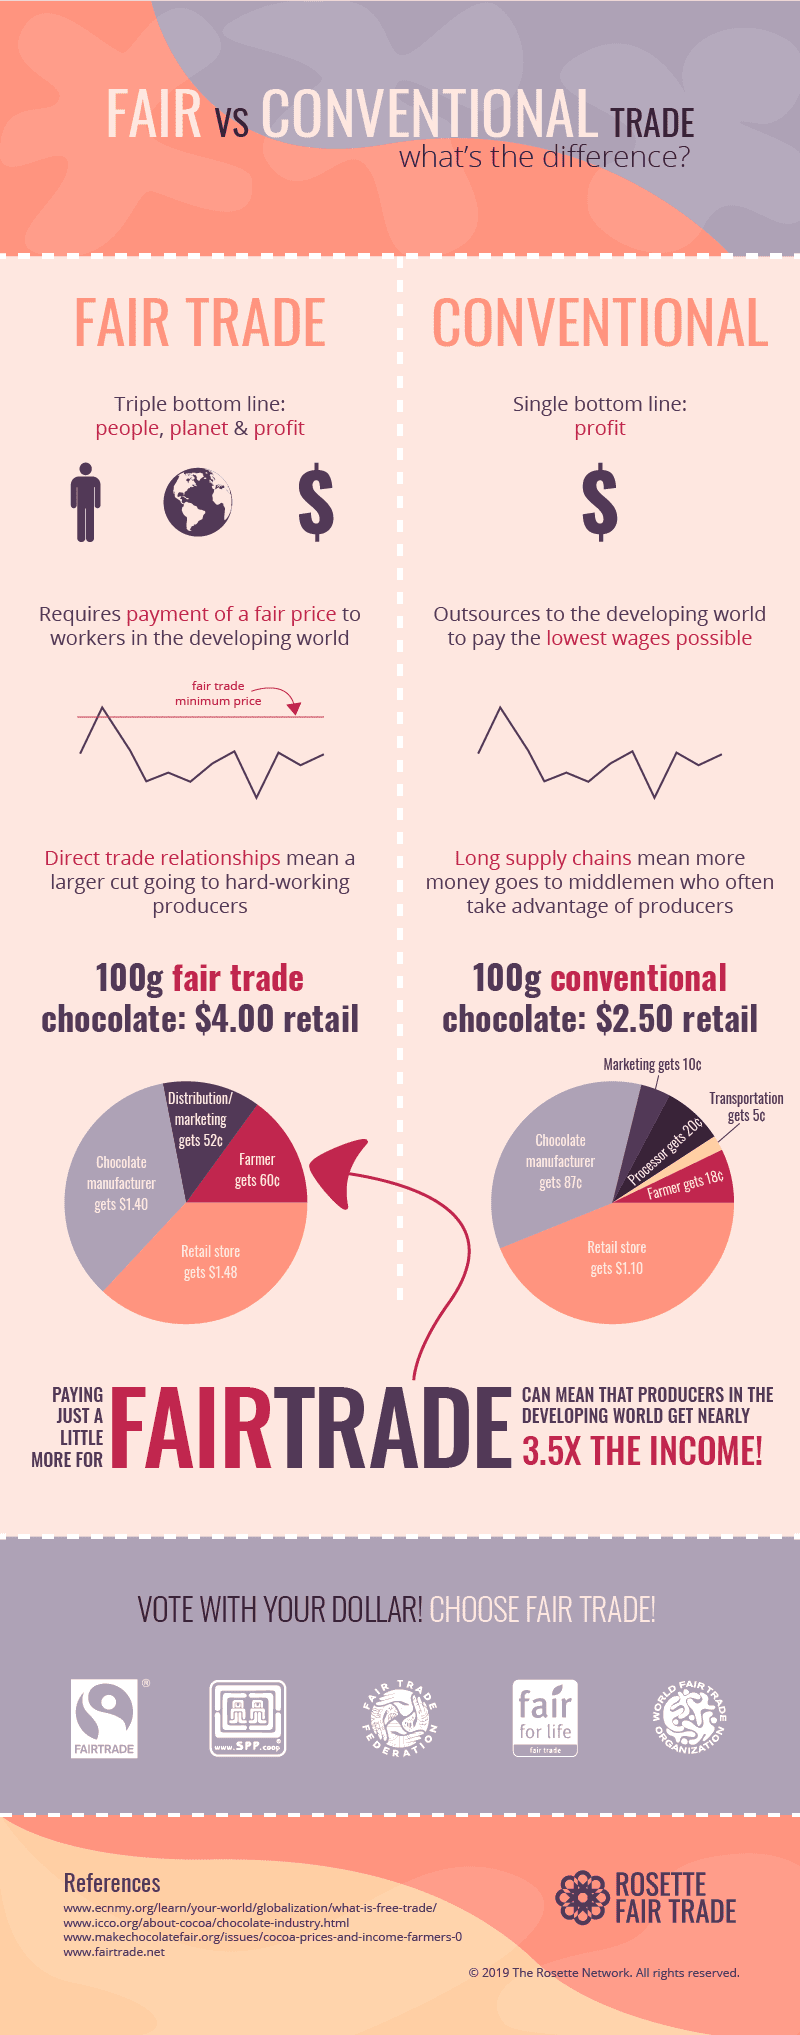 Fair trade vs free trade (conventional trade) infographic by Rosette Fair Trade - © 2019, all rights reserved